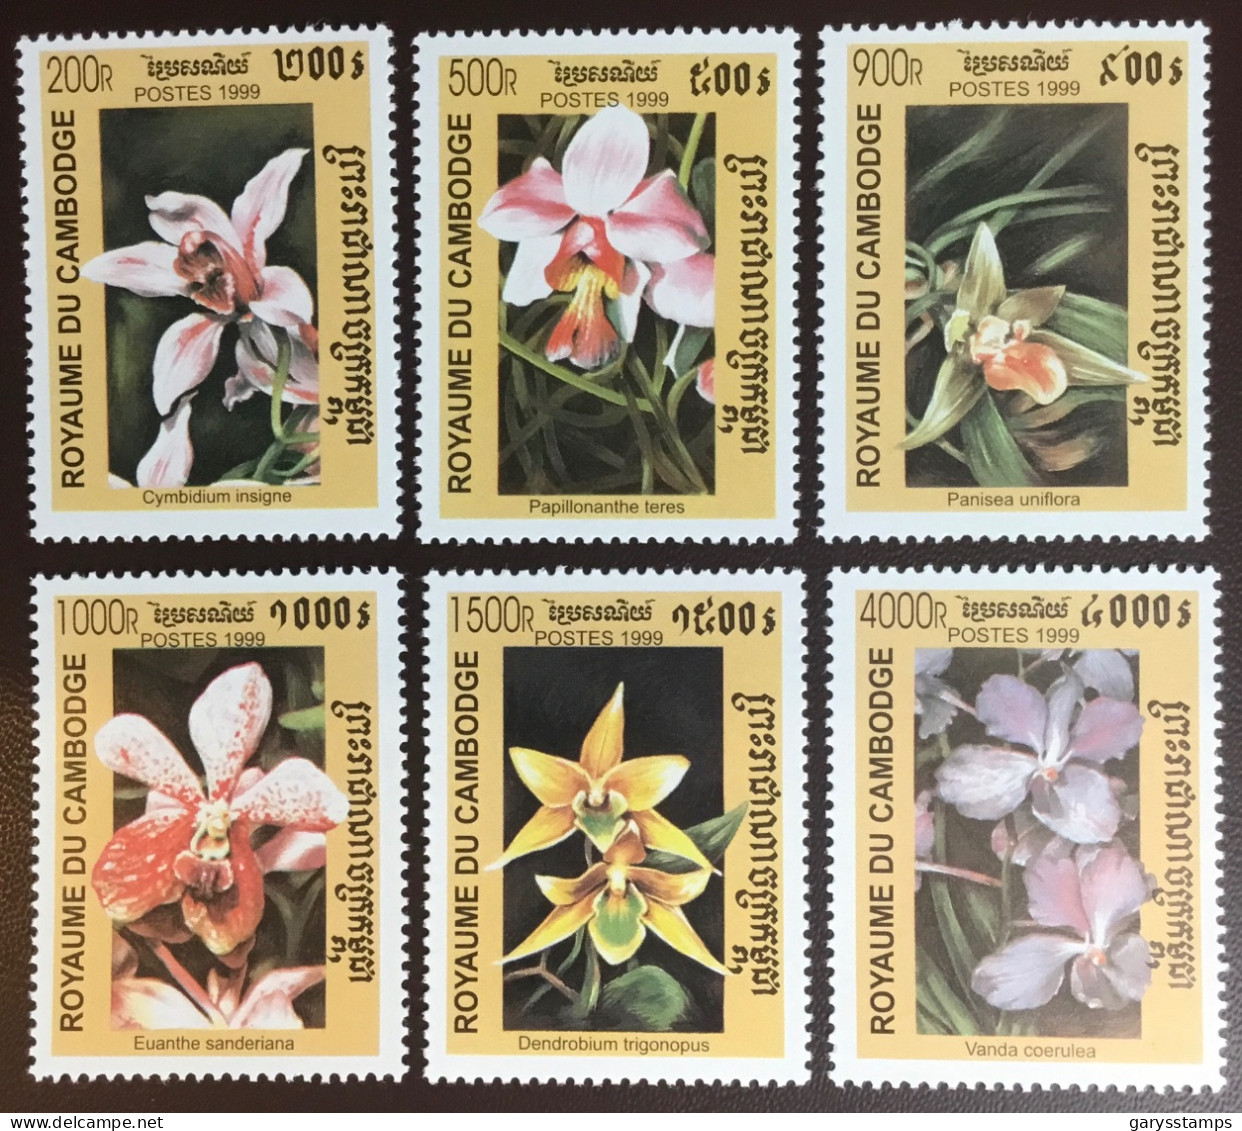 Cambodia 1999 Orchids Flowers MNH - Orchideeën